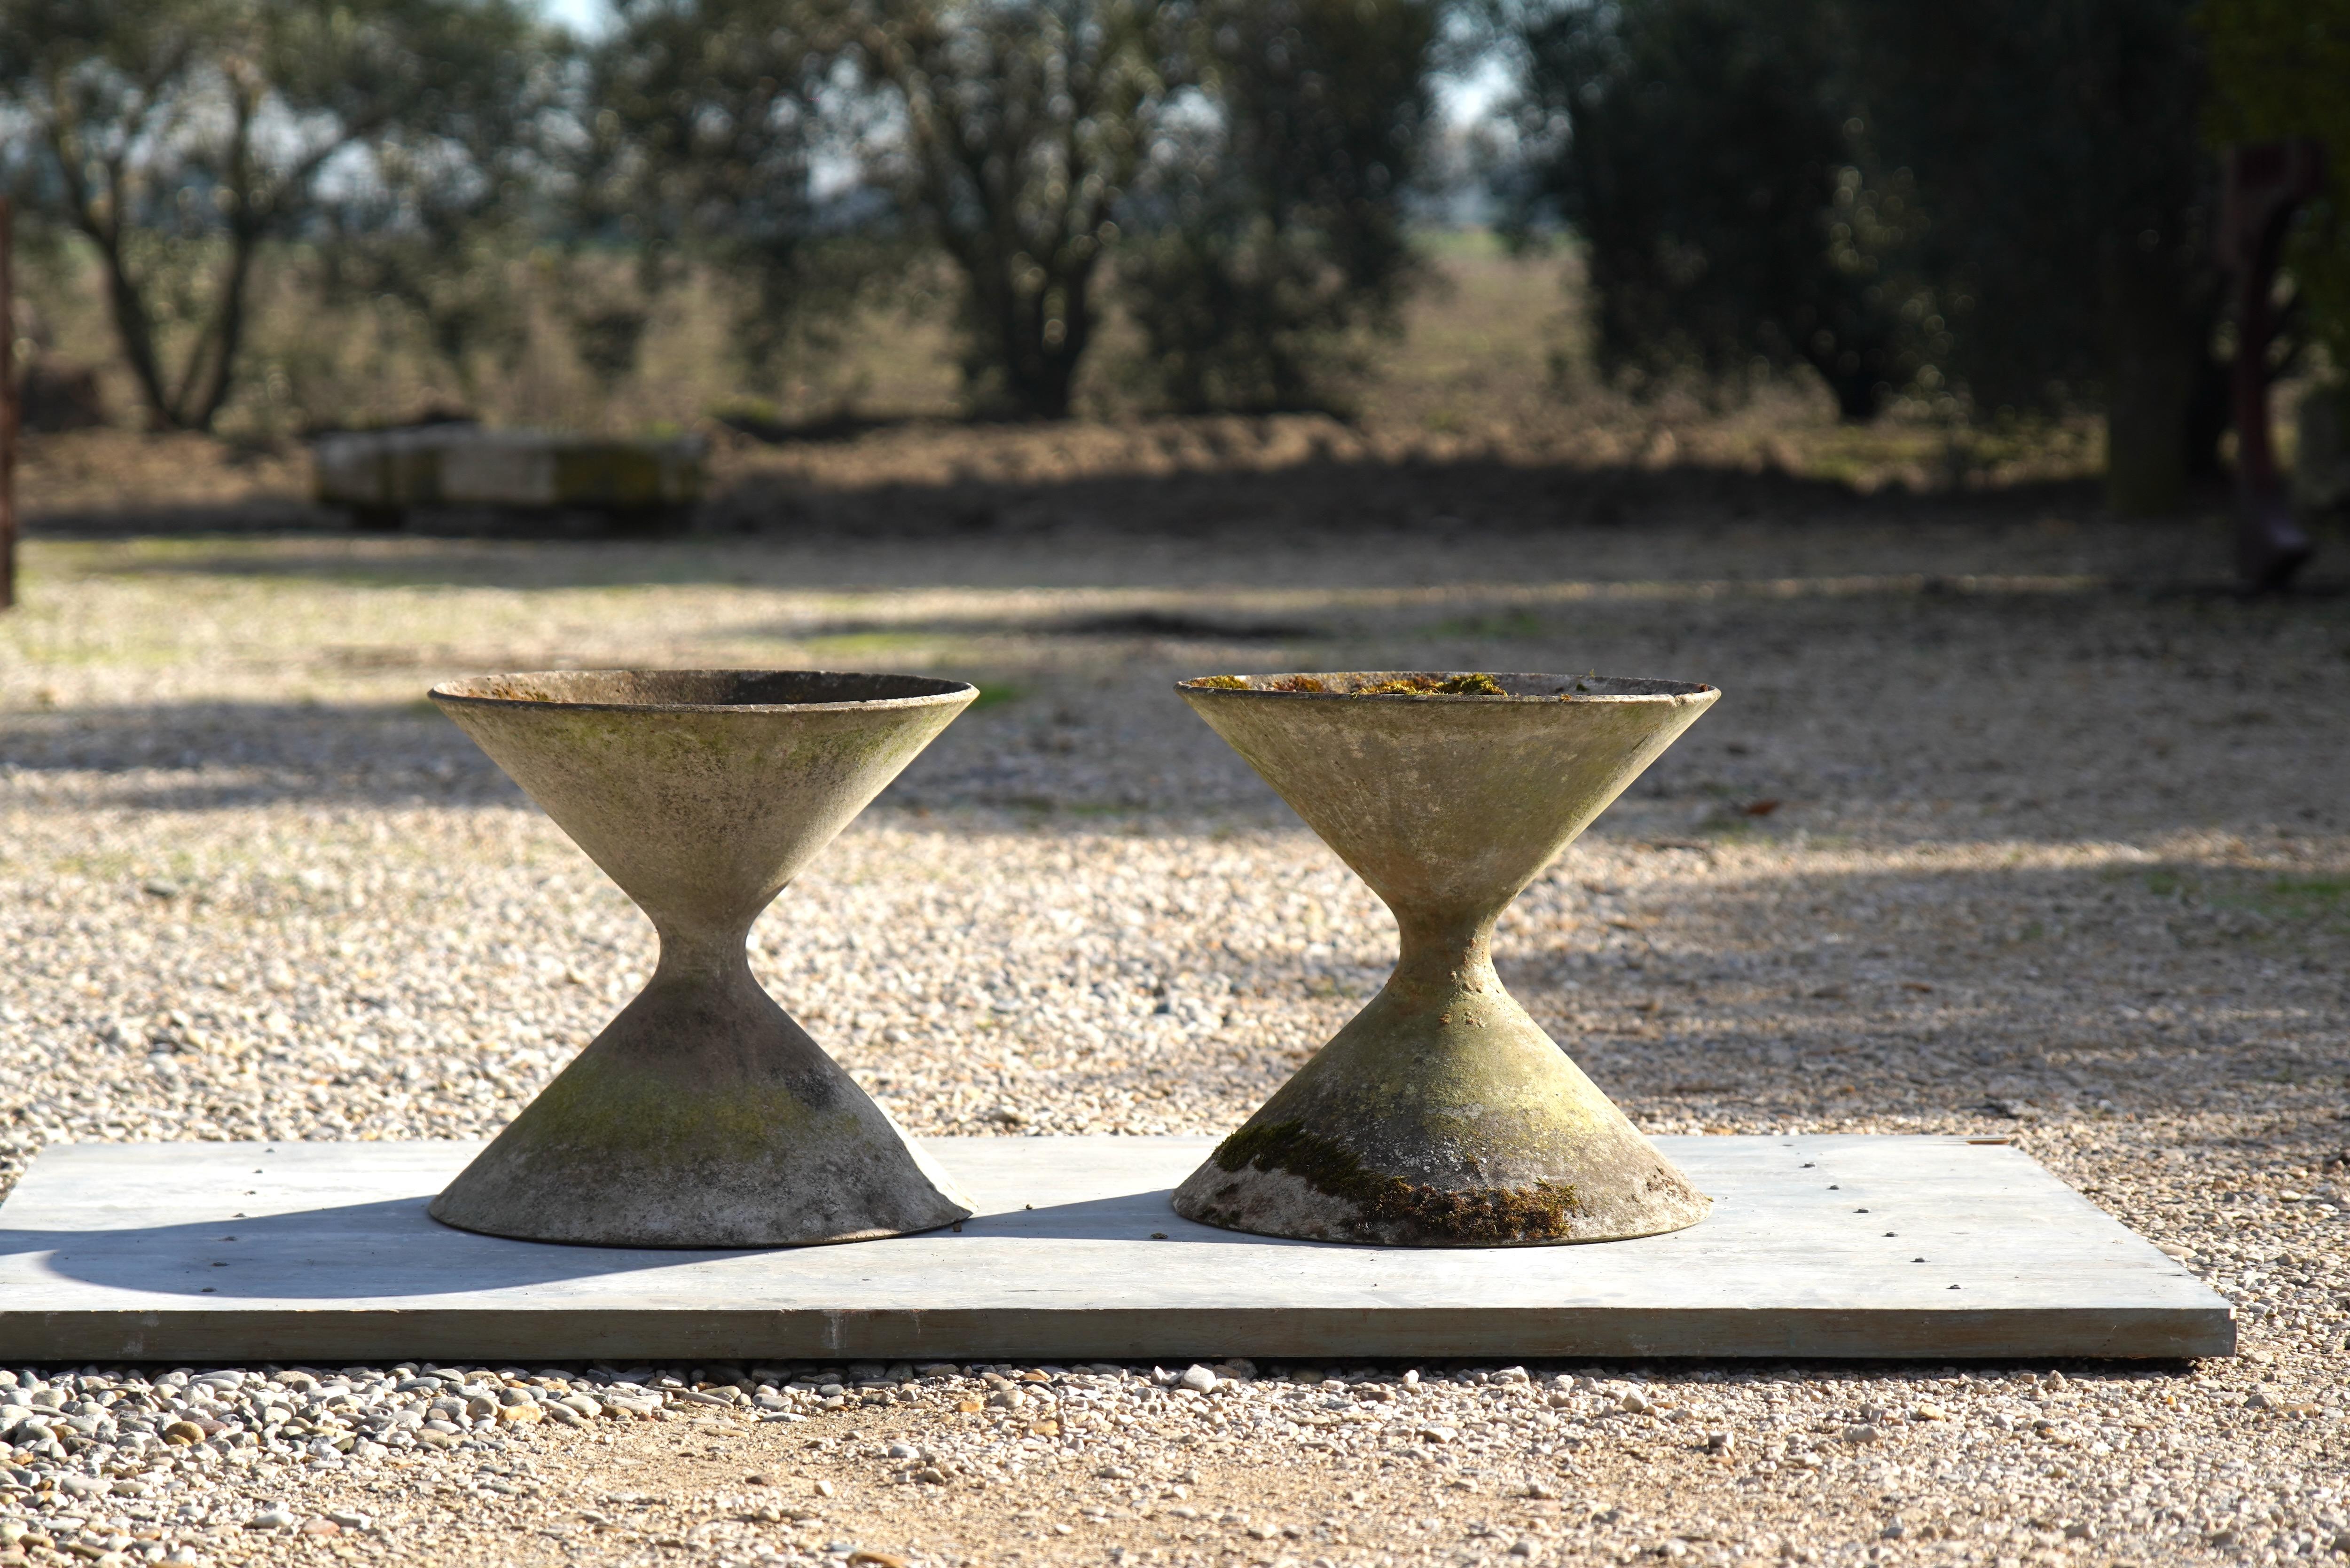 Vintage pair of rarely seen vintage Hourglass Planters by Swiss neo-functionalist and industrial design pioneer Willy Guhl for Eternit, Switzerland, circa 1970. 

These hourglass planters are shorter and wider than the usual 'Diablo' planters by